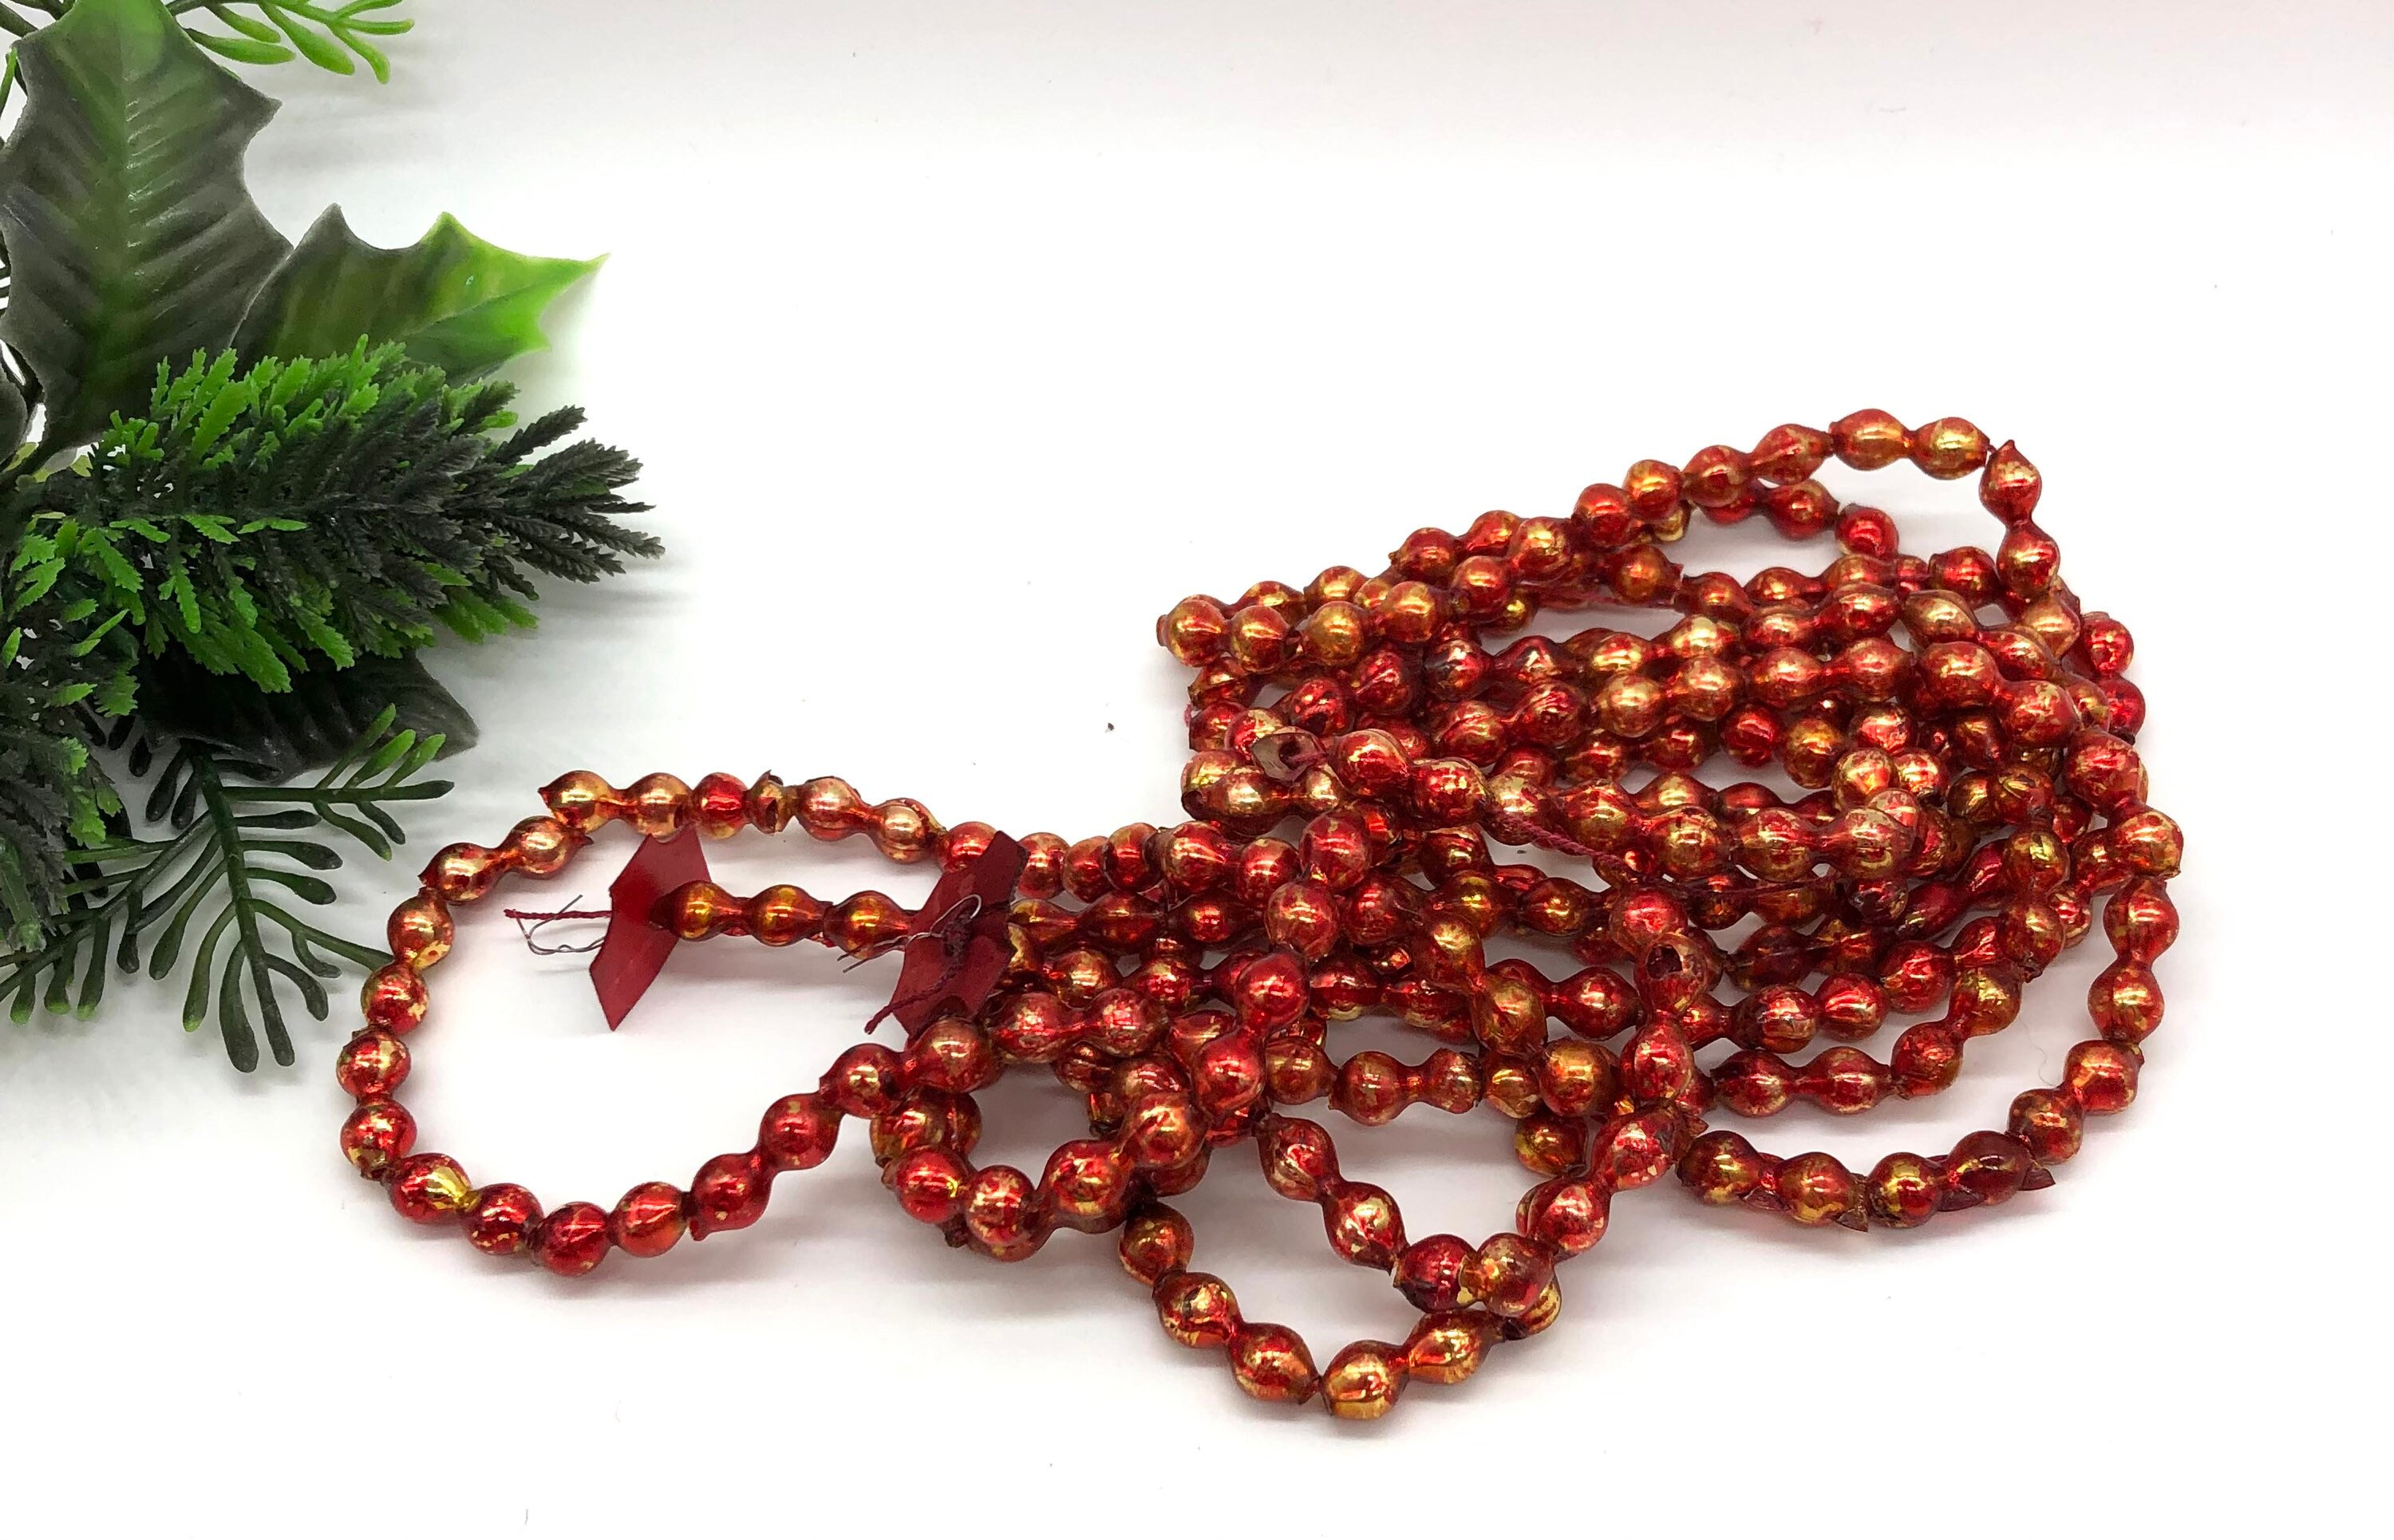 Vintage Mercury Glass Bead Garland 7' Beaded Green Red Gold 90